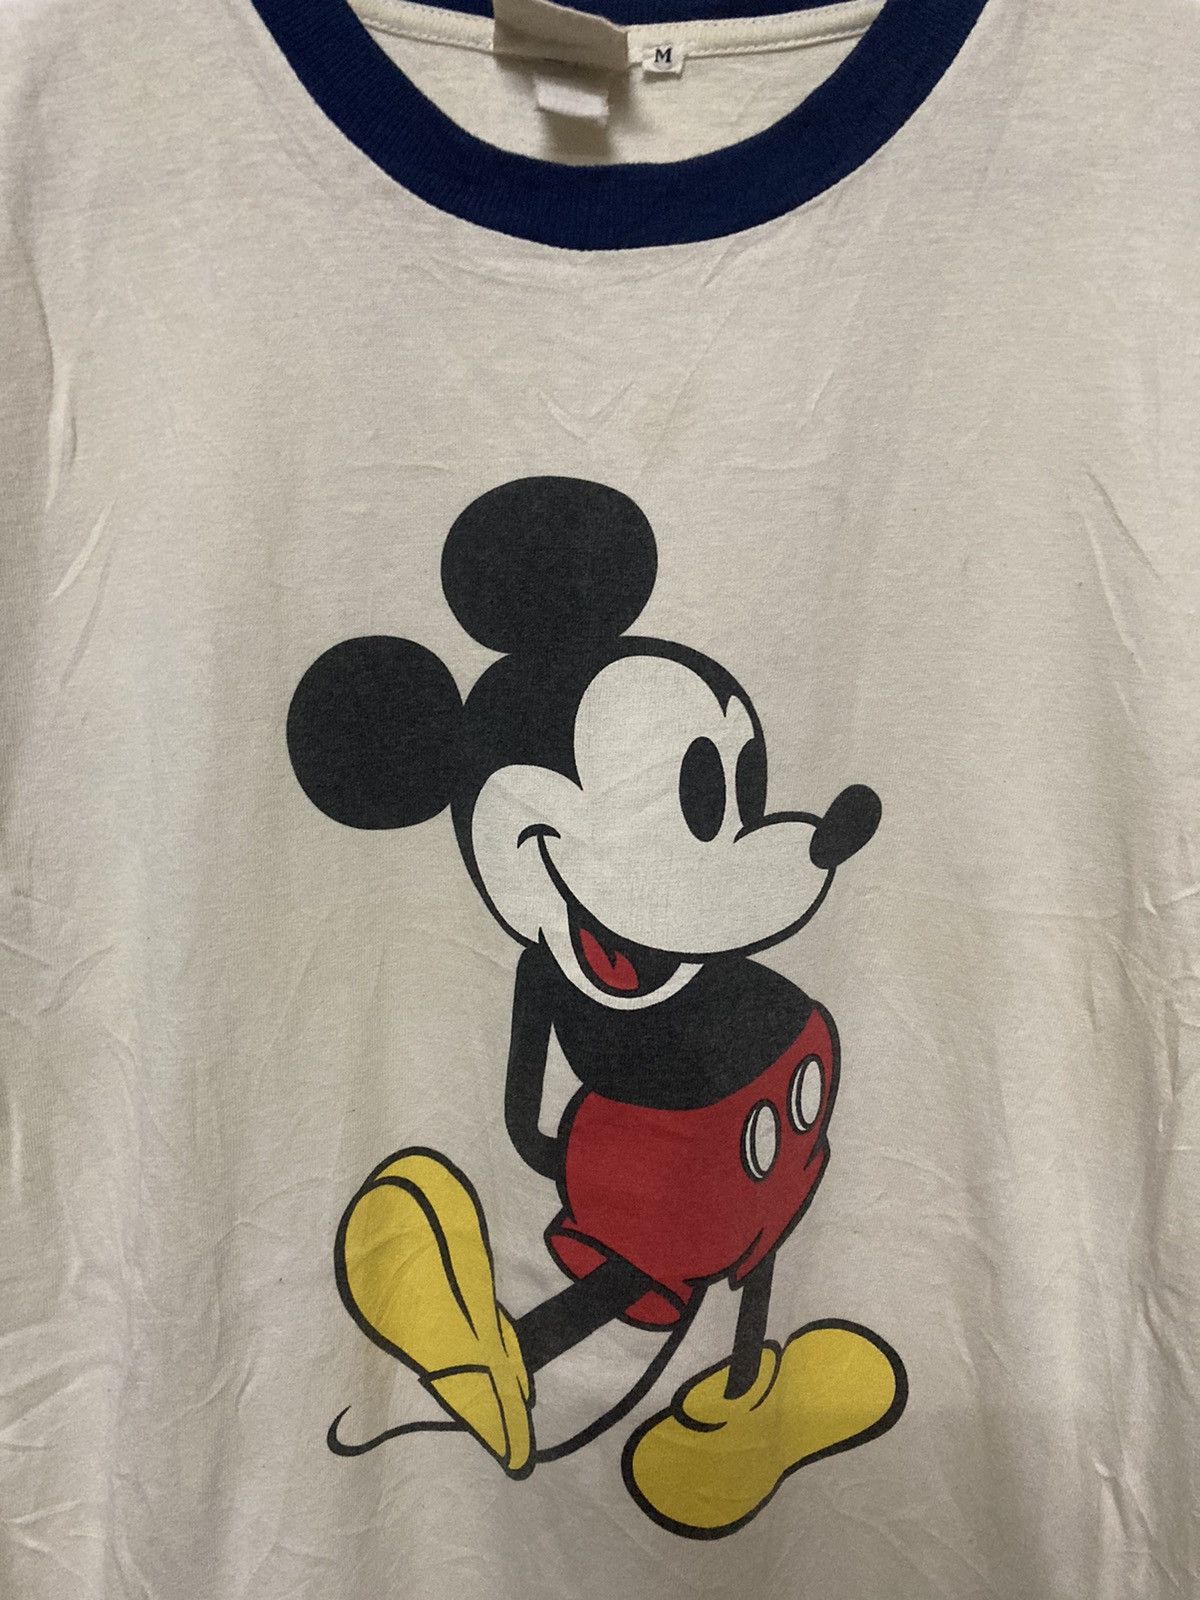 Vintage 90s Mickey Mouse Ringer T-shirt - 4